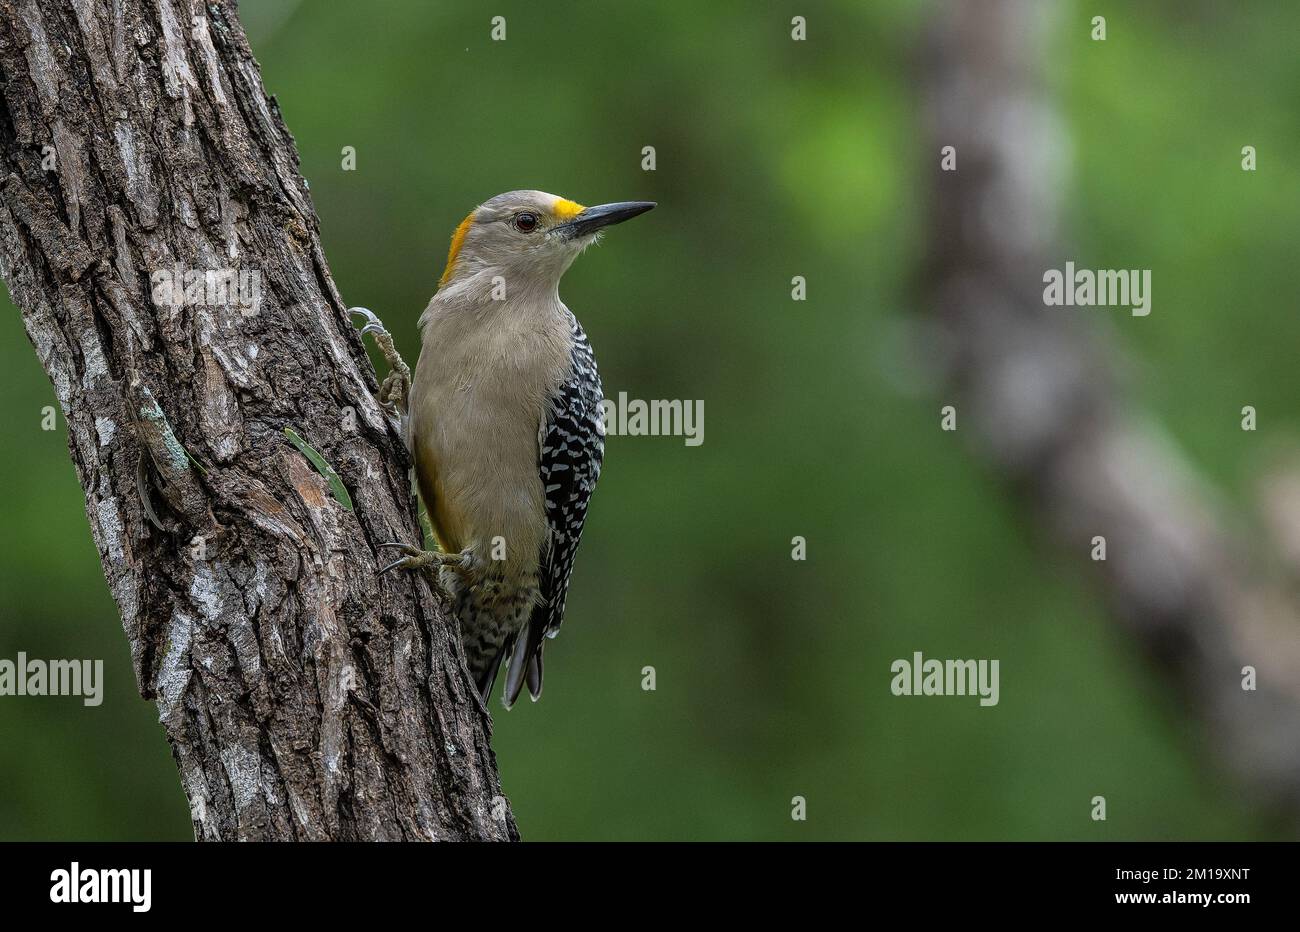 Golden-fronted woodpecker, Melanerpes aurifrons, perched on branch in woodland in winter. Texas. Stock Photo